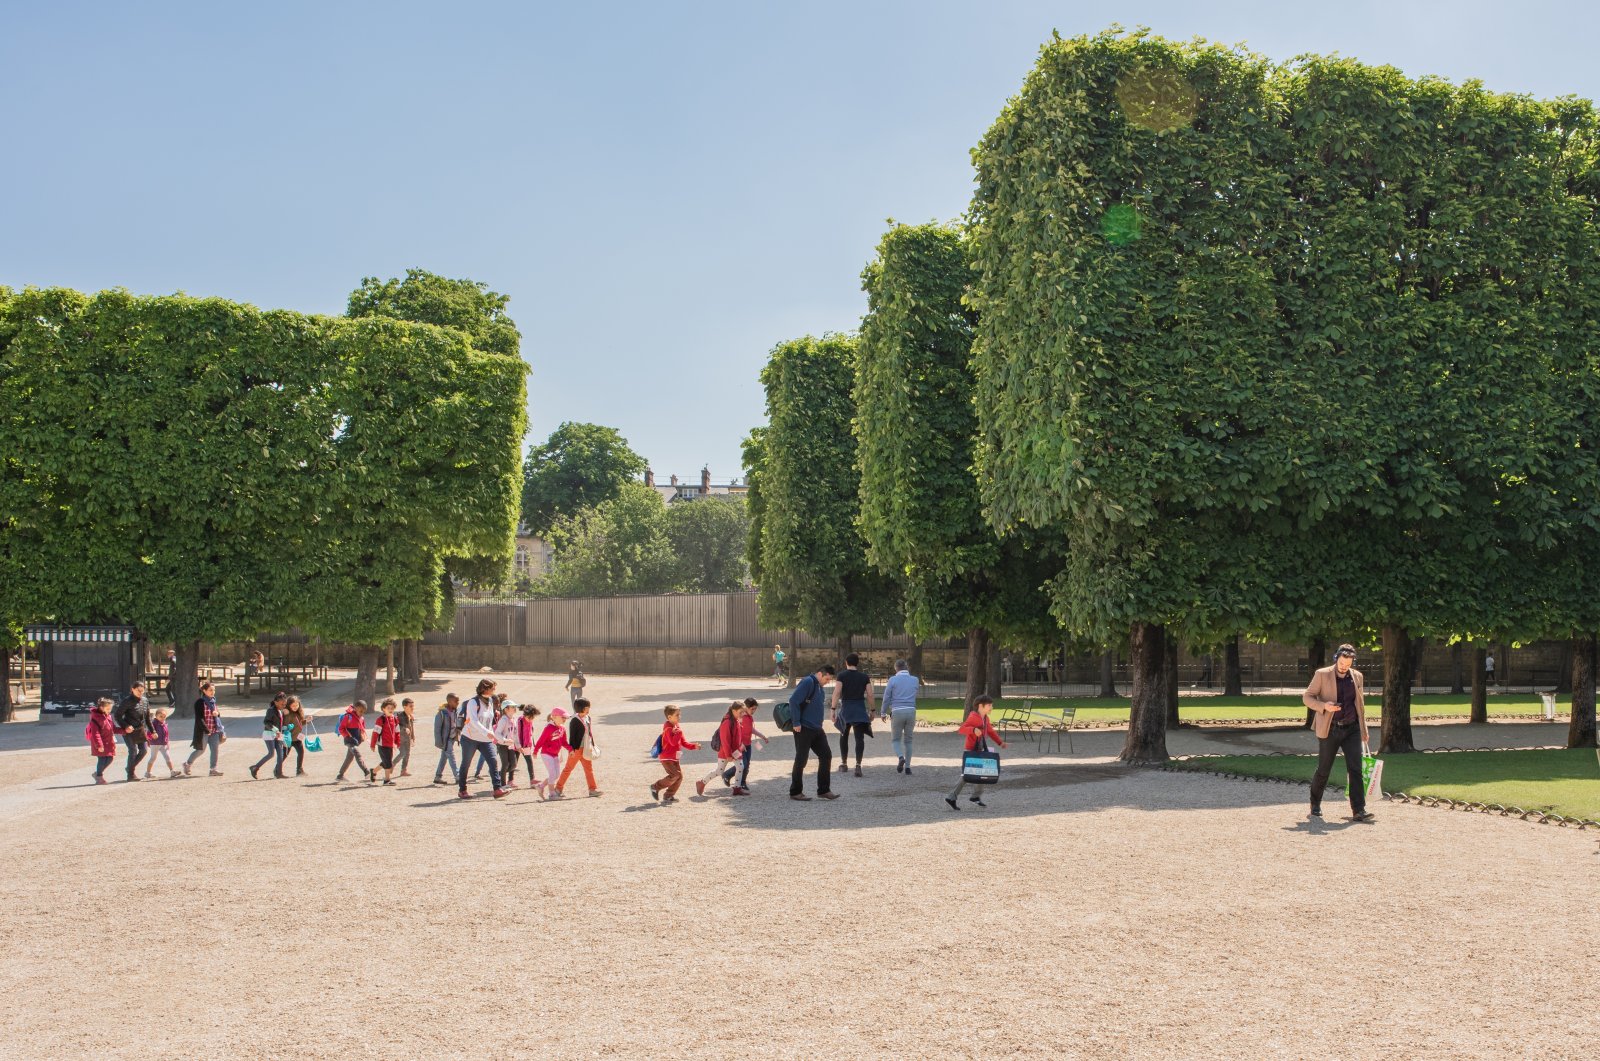 School children on a field trip to picnic at the Luxembourg Palace and Gardens, a popular and historic park in the Montparnasse neighborhood in Paris, May 18, 2018. (Shutterstock File Photo)